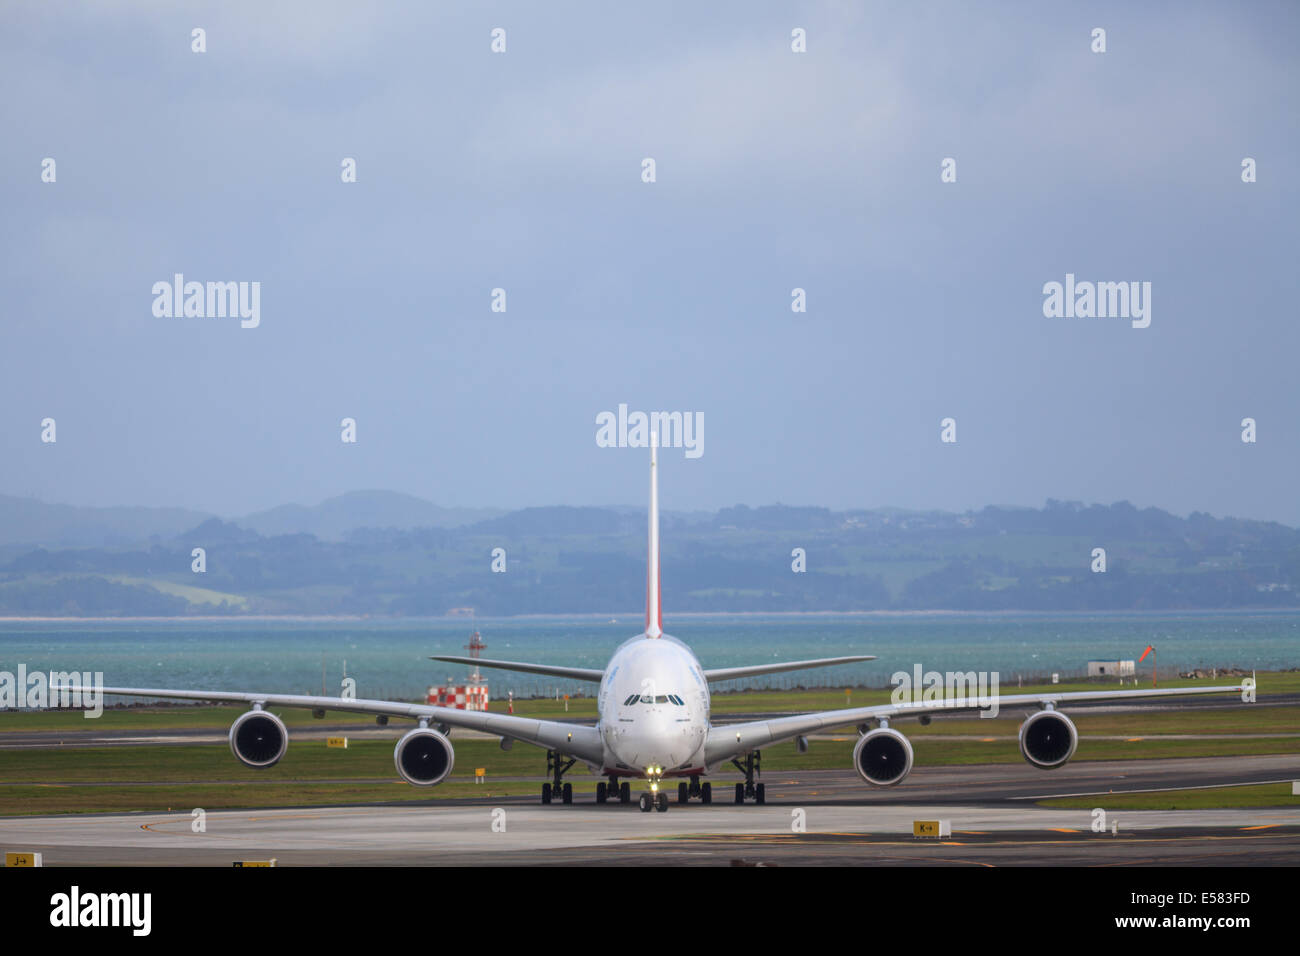 Emirates  Airbus A380 airplane  at AKL airport,Auckland,North Island,New Zealand AOTEAROA Stock Photo